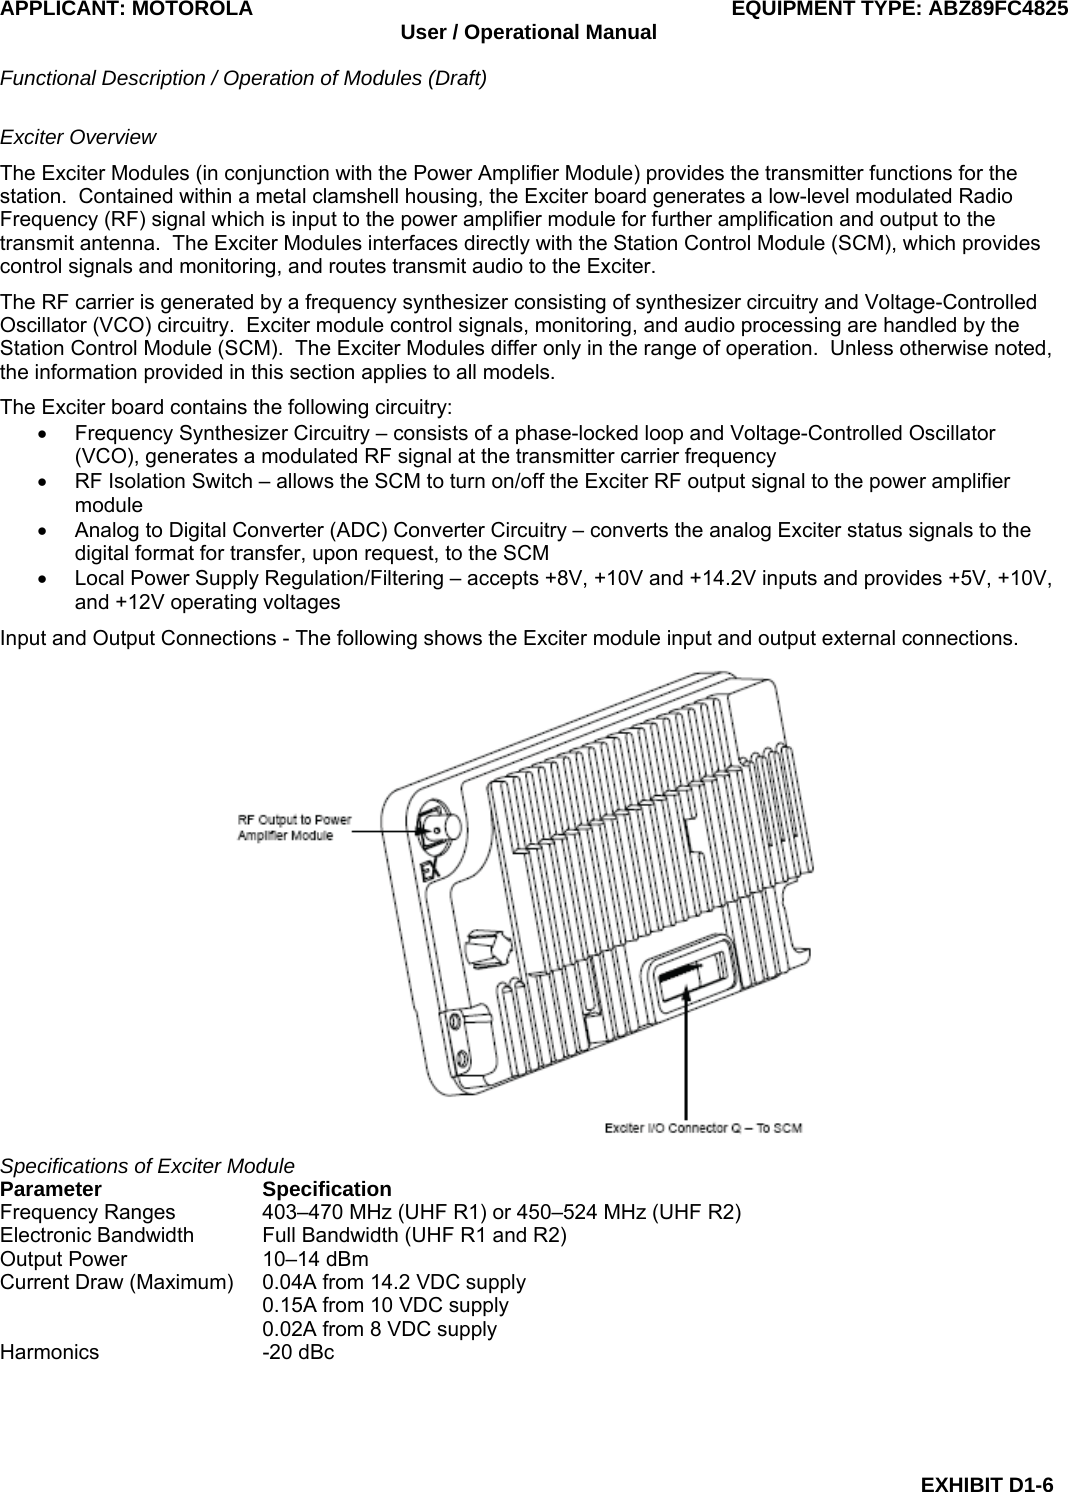 APPLICANT: MOTOROLA  EQUIPMENT TYPE: ABZ89FC4825 User / Operational Manual  Functional Description / Operation of Modules (Draft)  EXHIBIT D1-6 Exciter Overview The Exciter Modules (in conjunction with the Power Amplifier Module) provides the transmitter functions for the station.  Contained within a metal clamshell housing, the Exciter board generates a low-level modulated Radio Frequency (RF) signal which is input to the power amplifier module for further amplification and output to the transmit antenna.  The Exciter Modules interfaces directly with the Station Control Module (SCM), which provides control signals and monitoring, and routes transmit audio to the Exciter. The RF carrier is generated by a frequency synthesizer consisting of synthesizer circuitry and Voltage-Controlled Oscillator (VCO) circuitry.  Exciter module control signals, monitoring, and audio processing are handled by the Station Control Module (SCM).  The Exciter Modules differ only in the range of operation.  Unless otherwise noted, the information provided in this section applies to all models. The Exciter board contains the following circuitry: •  Frequency Synthesizer Circuitry – consists of a phase-locked loop and Voltage-Controlled Oscillator (VCO), generates a modulated RF signal at the transmitter carrier frequency •  RF Isolation Switch – allows the SCM to turn on/off the Exciter RF output signal to the power amplifier module •  Analog to Digital Converter (ADC) Converter Circuitry – converts the analog Exciter status signals to the digital format for transfer, upon request, to the SCM •  Local Power Supply Regulation/Filtering – accepts +8V, +10V and +14.2V inputs and provides +5V, +10V, and +12V operating voltages Input and Output Connections - The following shows the Exciter module input and output external connections.  Specifications of Exciter Module Parameter Specification Frequency Ranges  403–470 MHz (UHF R1) or 450–524 MHz (UHF R2) Electronic Bandwidth  Full Bandwidth (UHF R1 and R2) Output Power  10–14 dBm Current Draw (Maximum)  0.04A from 14.2 VDC supply   0.15A from 10 VDC supply   0.02A from 8 VDC supply Harmonics -20 dBc  